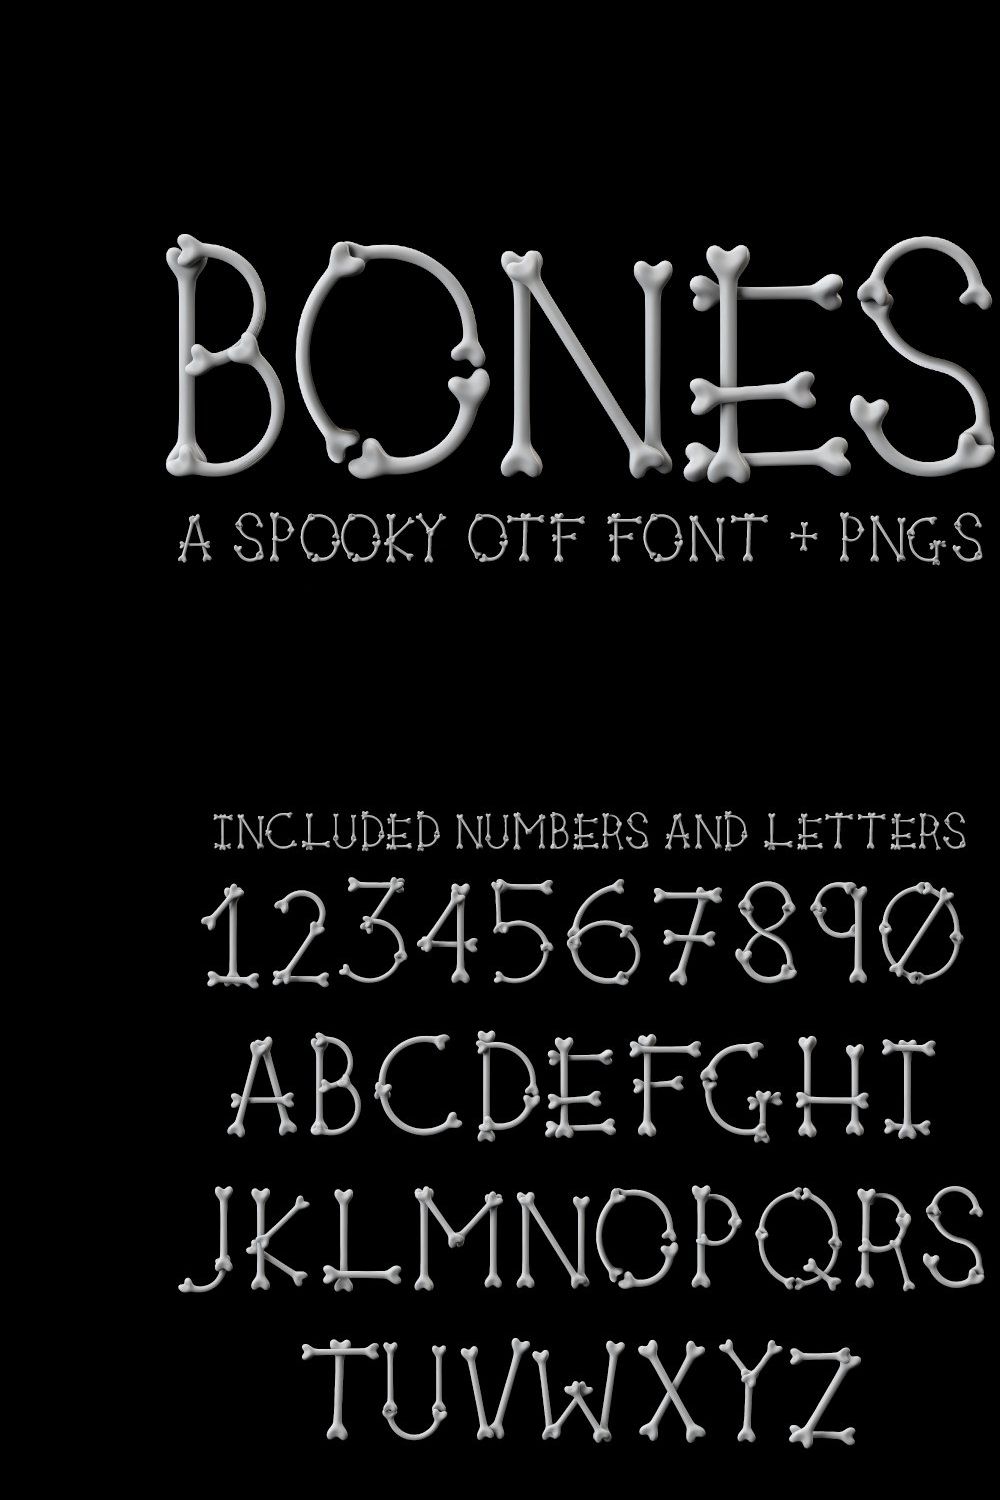 Bones OTF font and PNG images pinterest preview image.